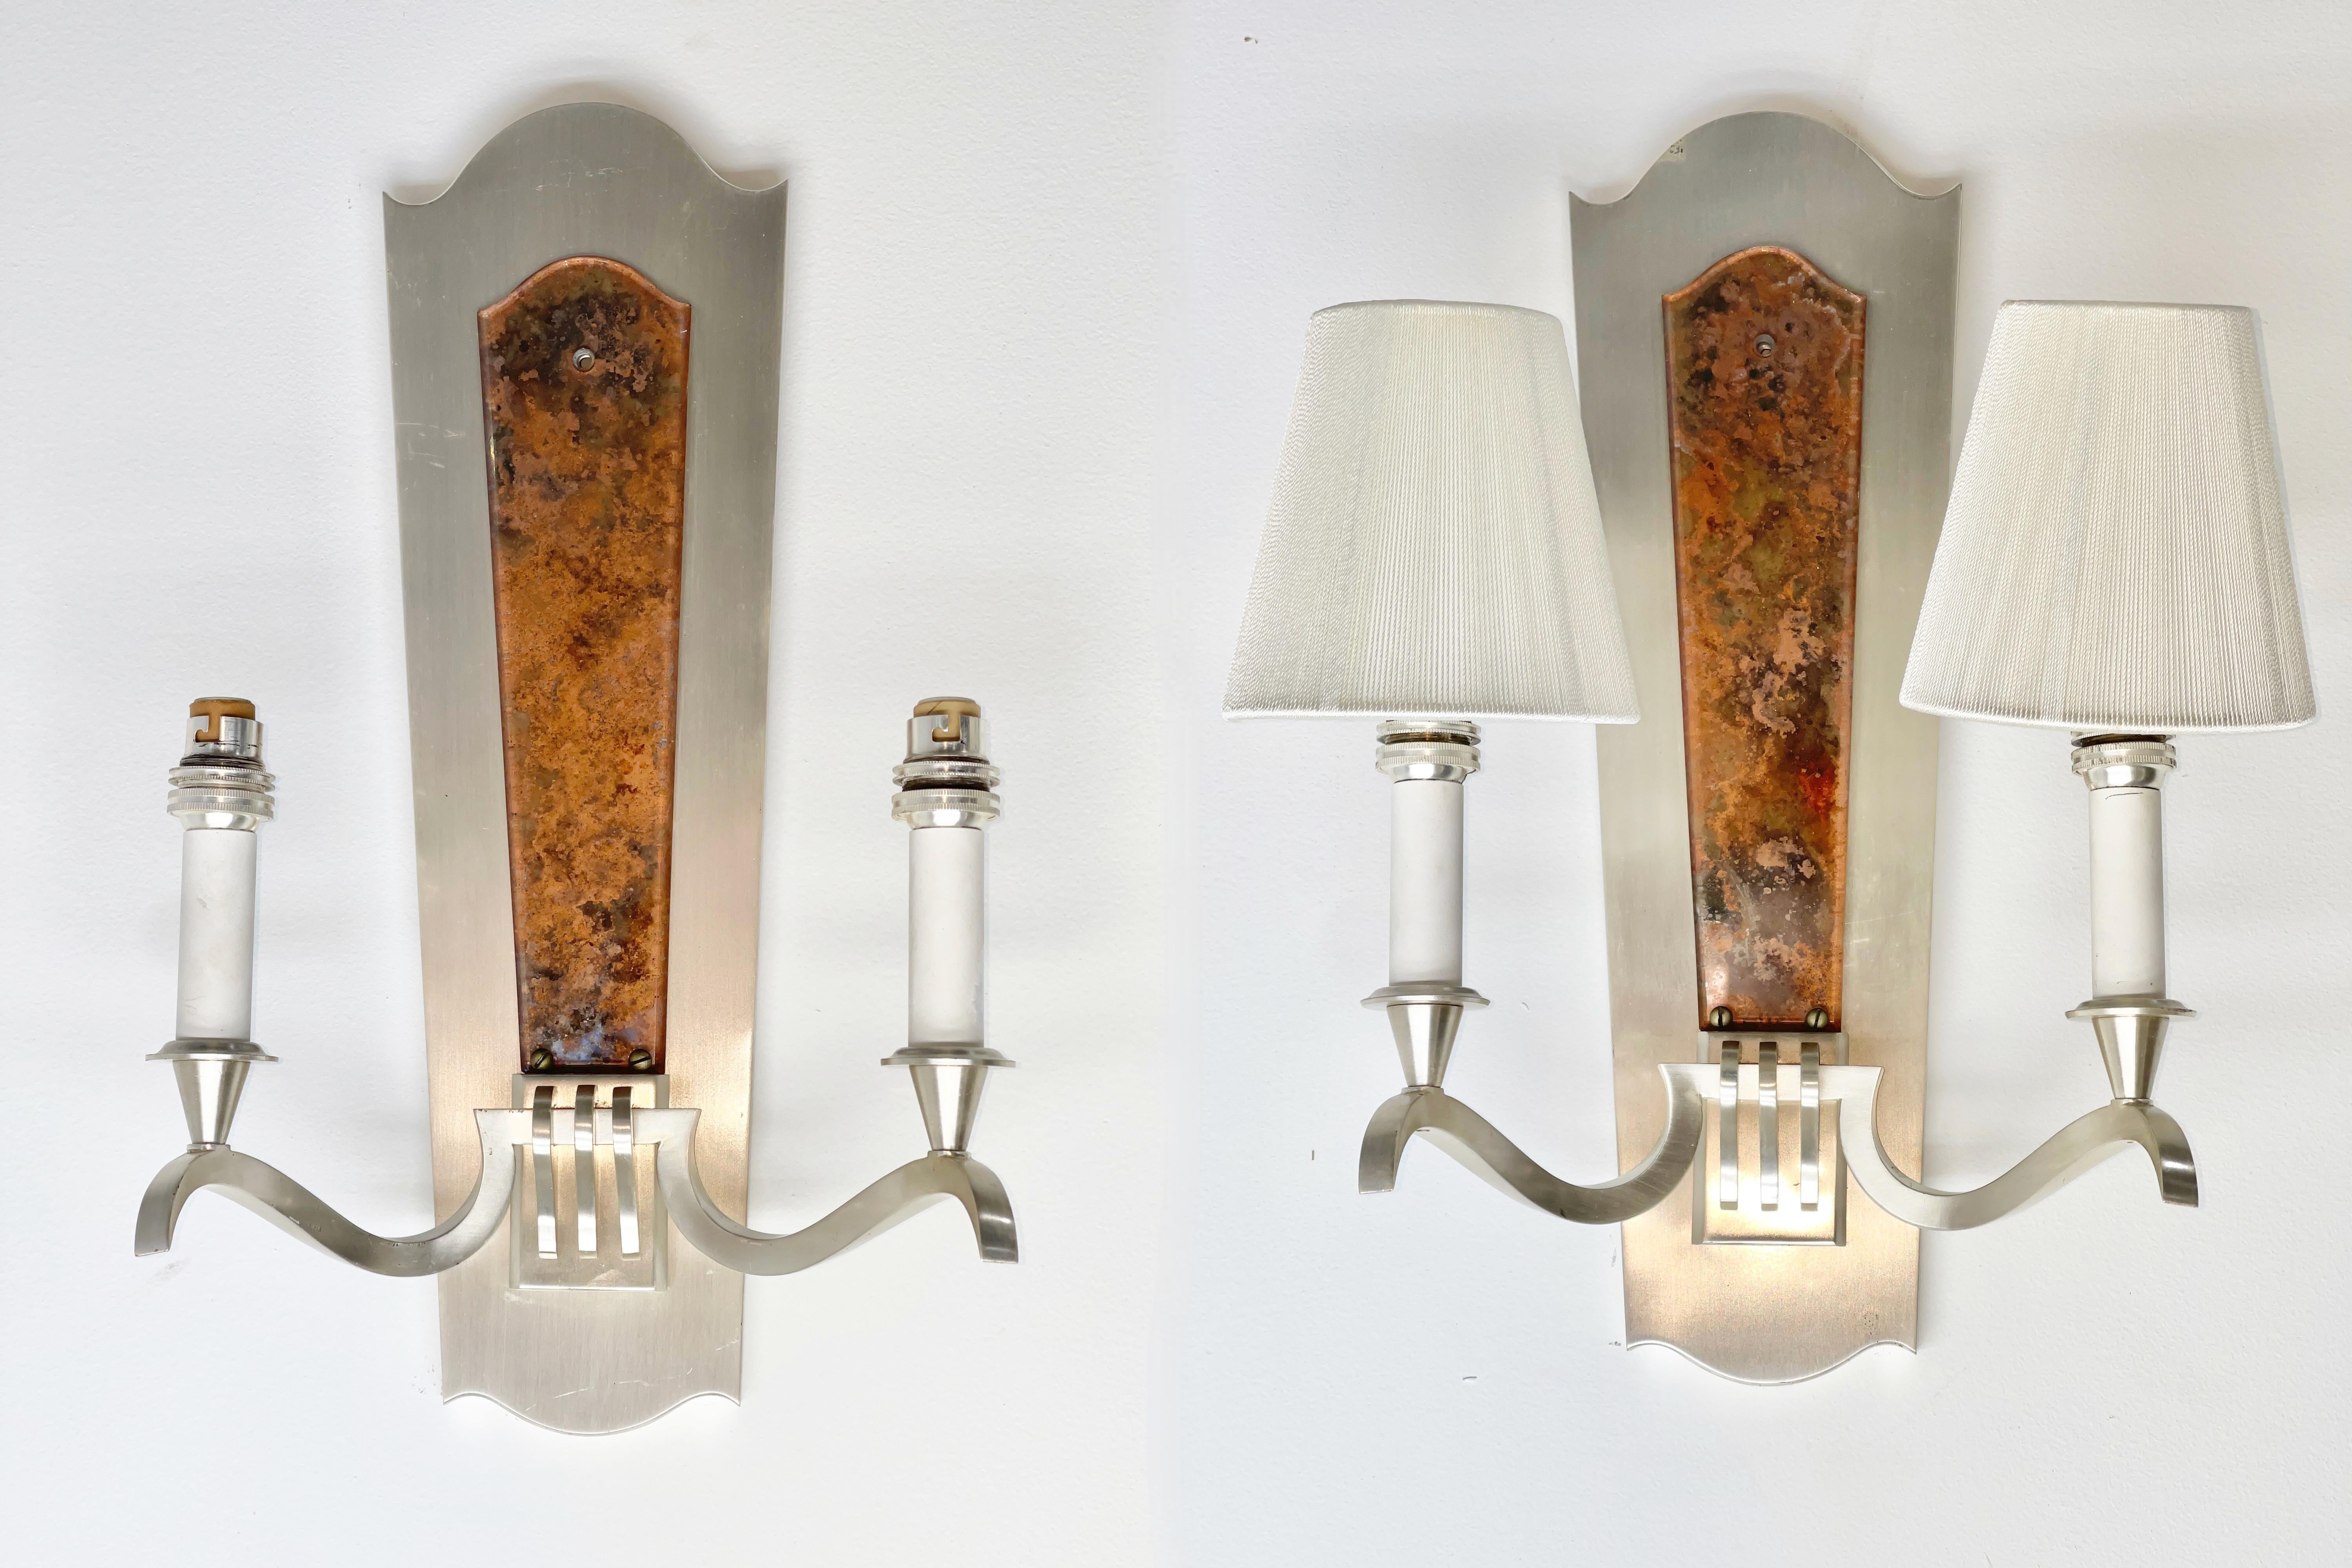 Pair of French modernist wall sconces in brushed nickel plating with a faux eglomise beveled acrylic panel on the face of the backplate, attributed to Genet et Michon.
Dimensions shown are for sconce without shades.
Shades shown for display purposes